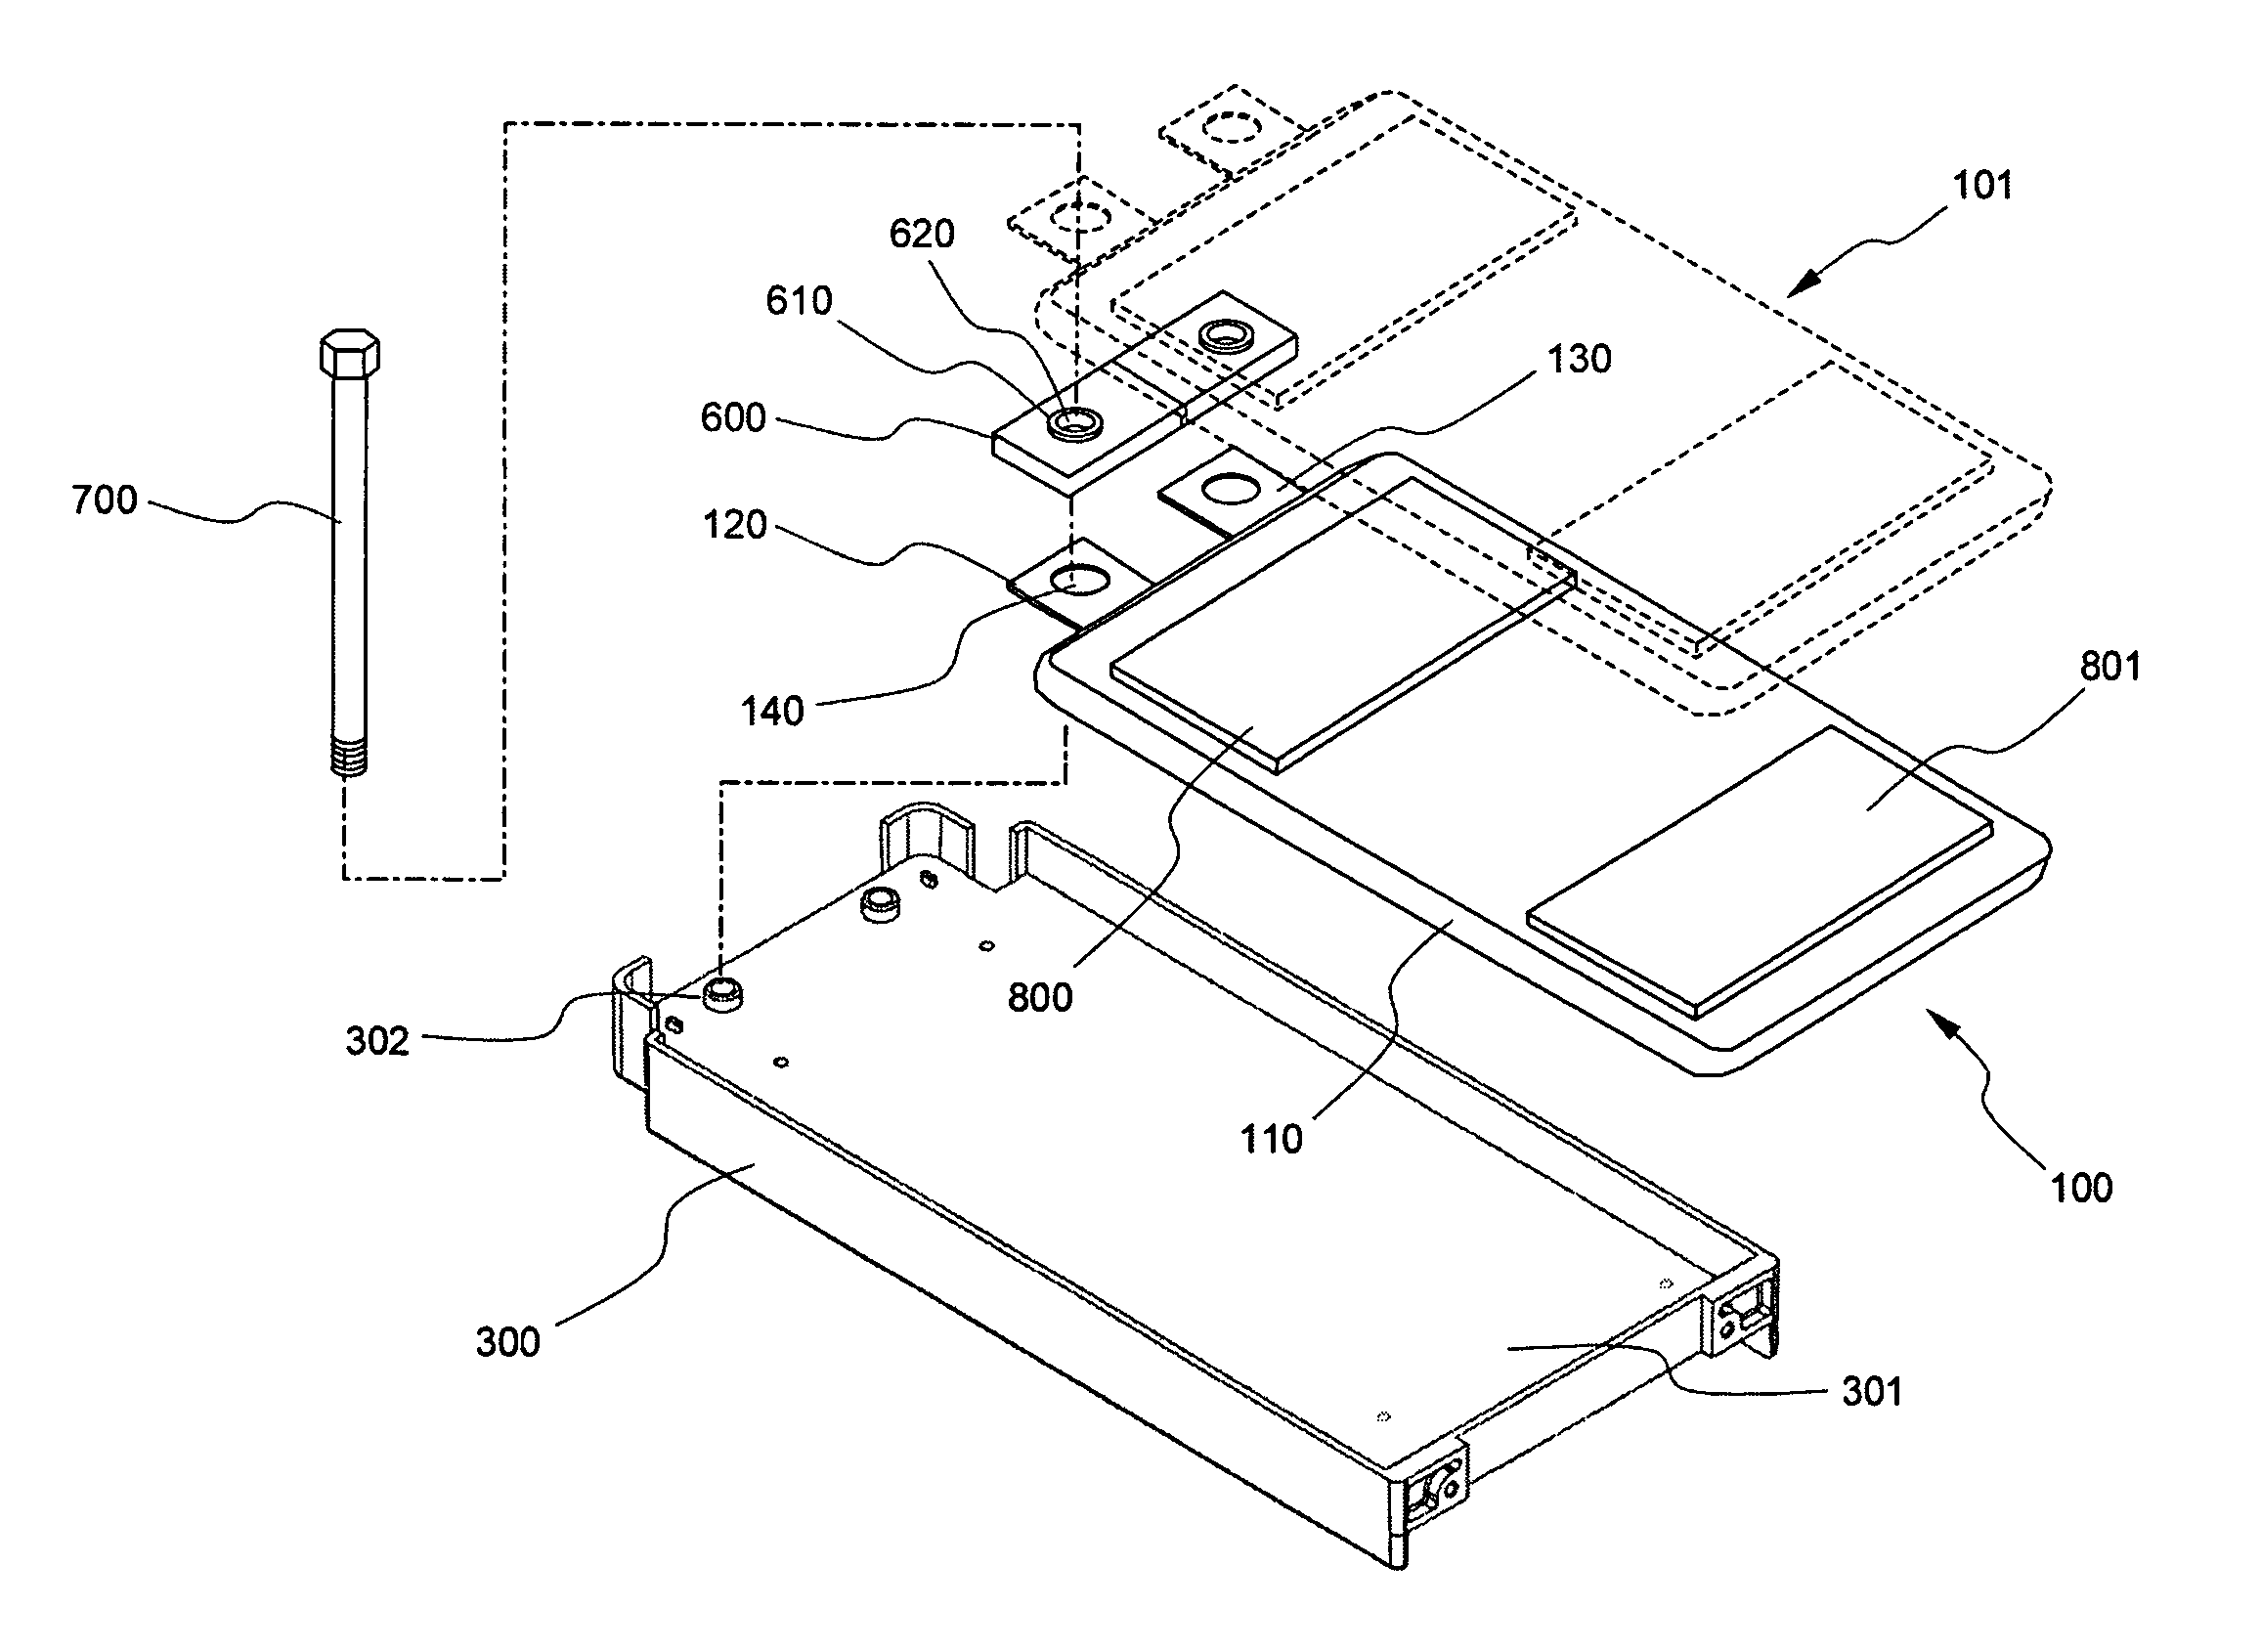 Secondary battery module with exposed unit cells and insulation between terminals